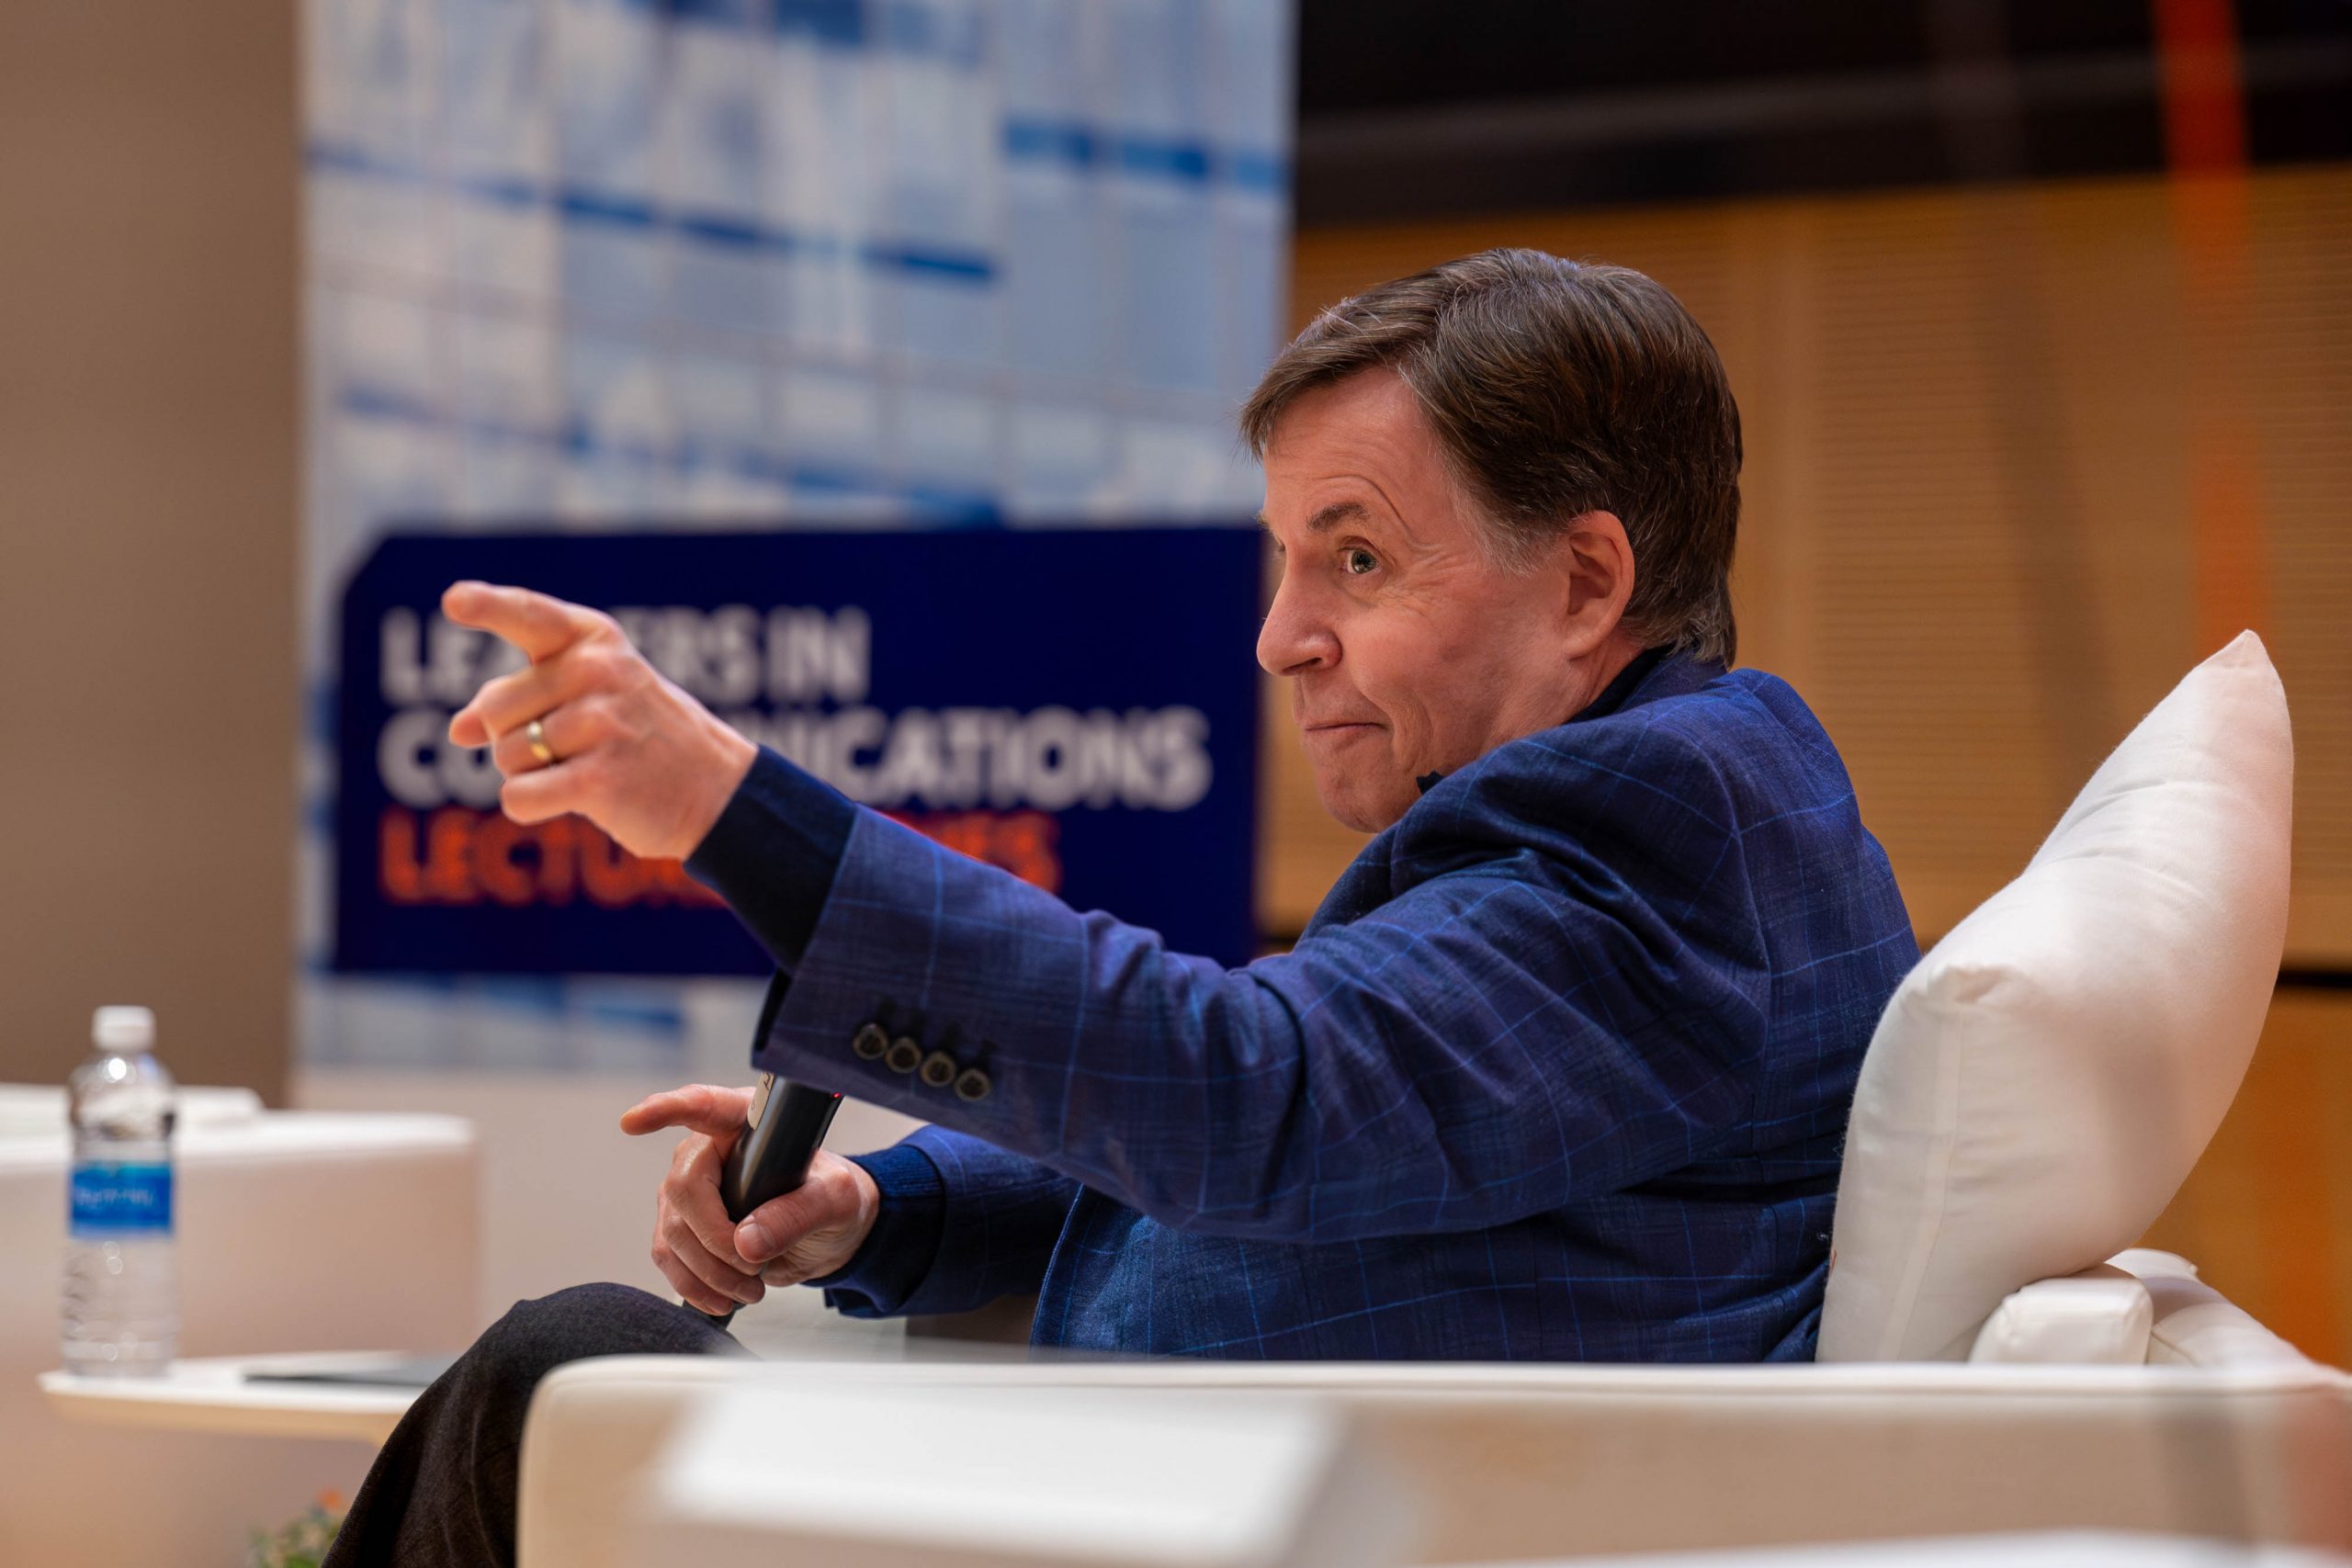 Bob Costas speaks to students and alum during a Leaders in Communications Lecture at Syracuse University on Friday.